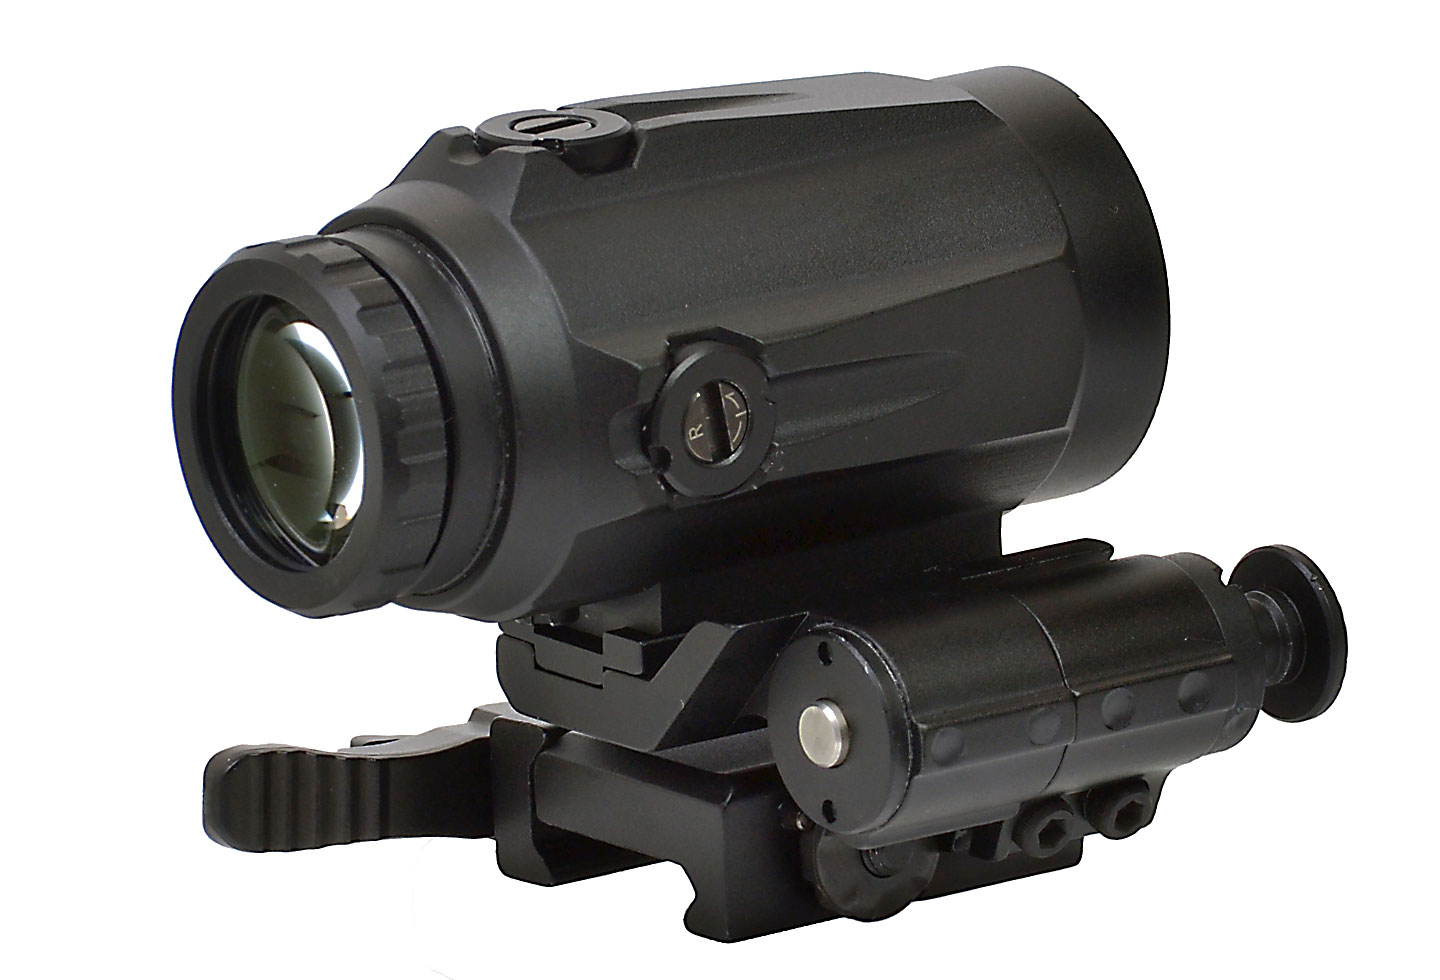 MICRO 3X TACTICAL MAGNIFIER